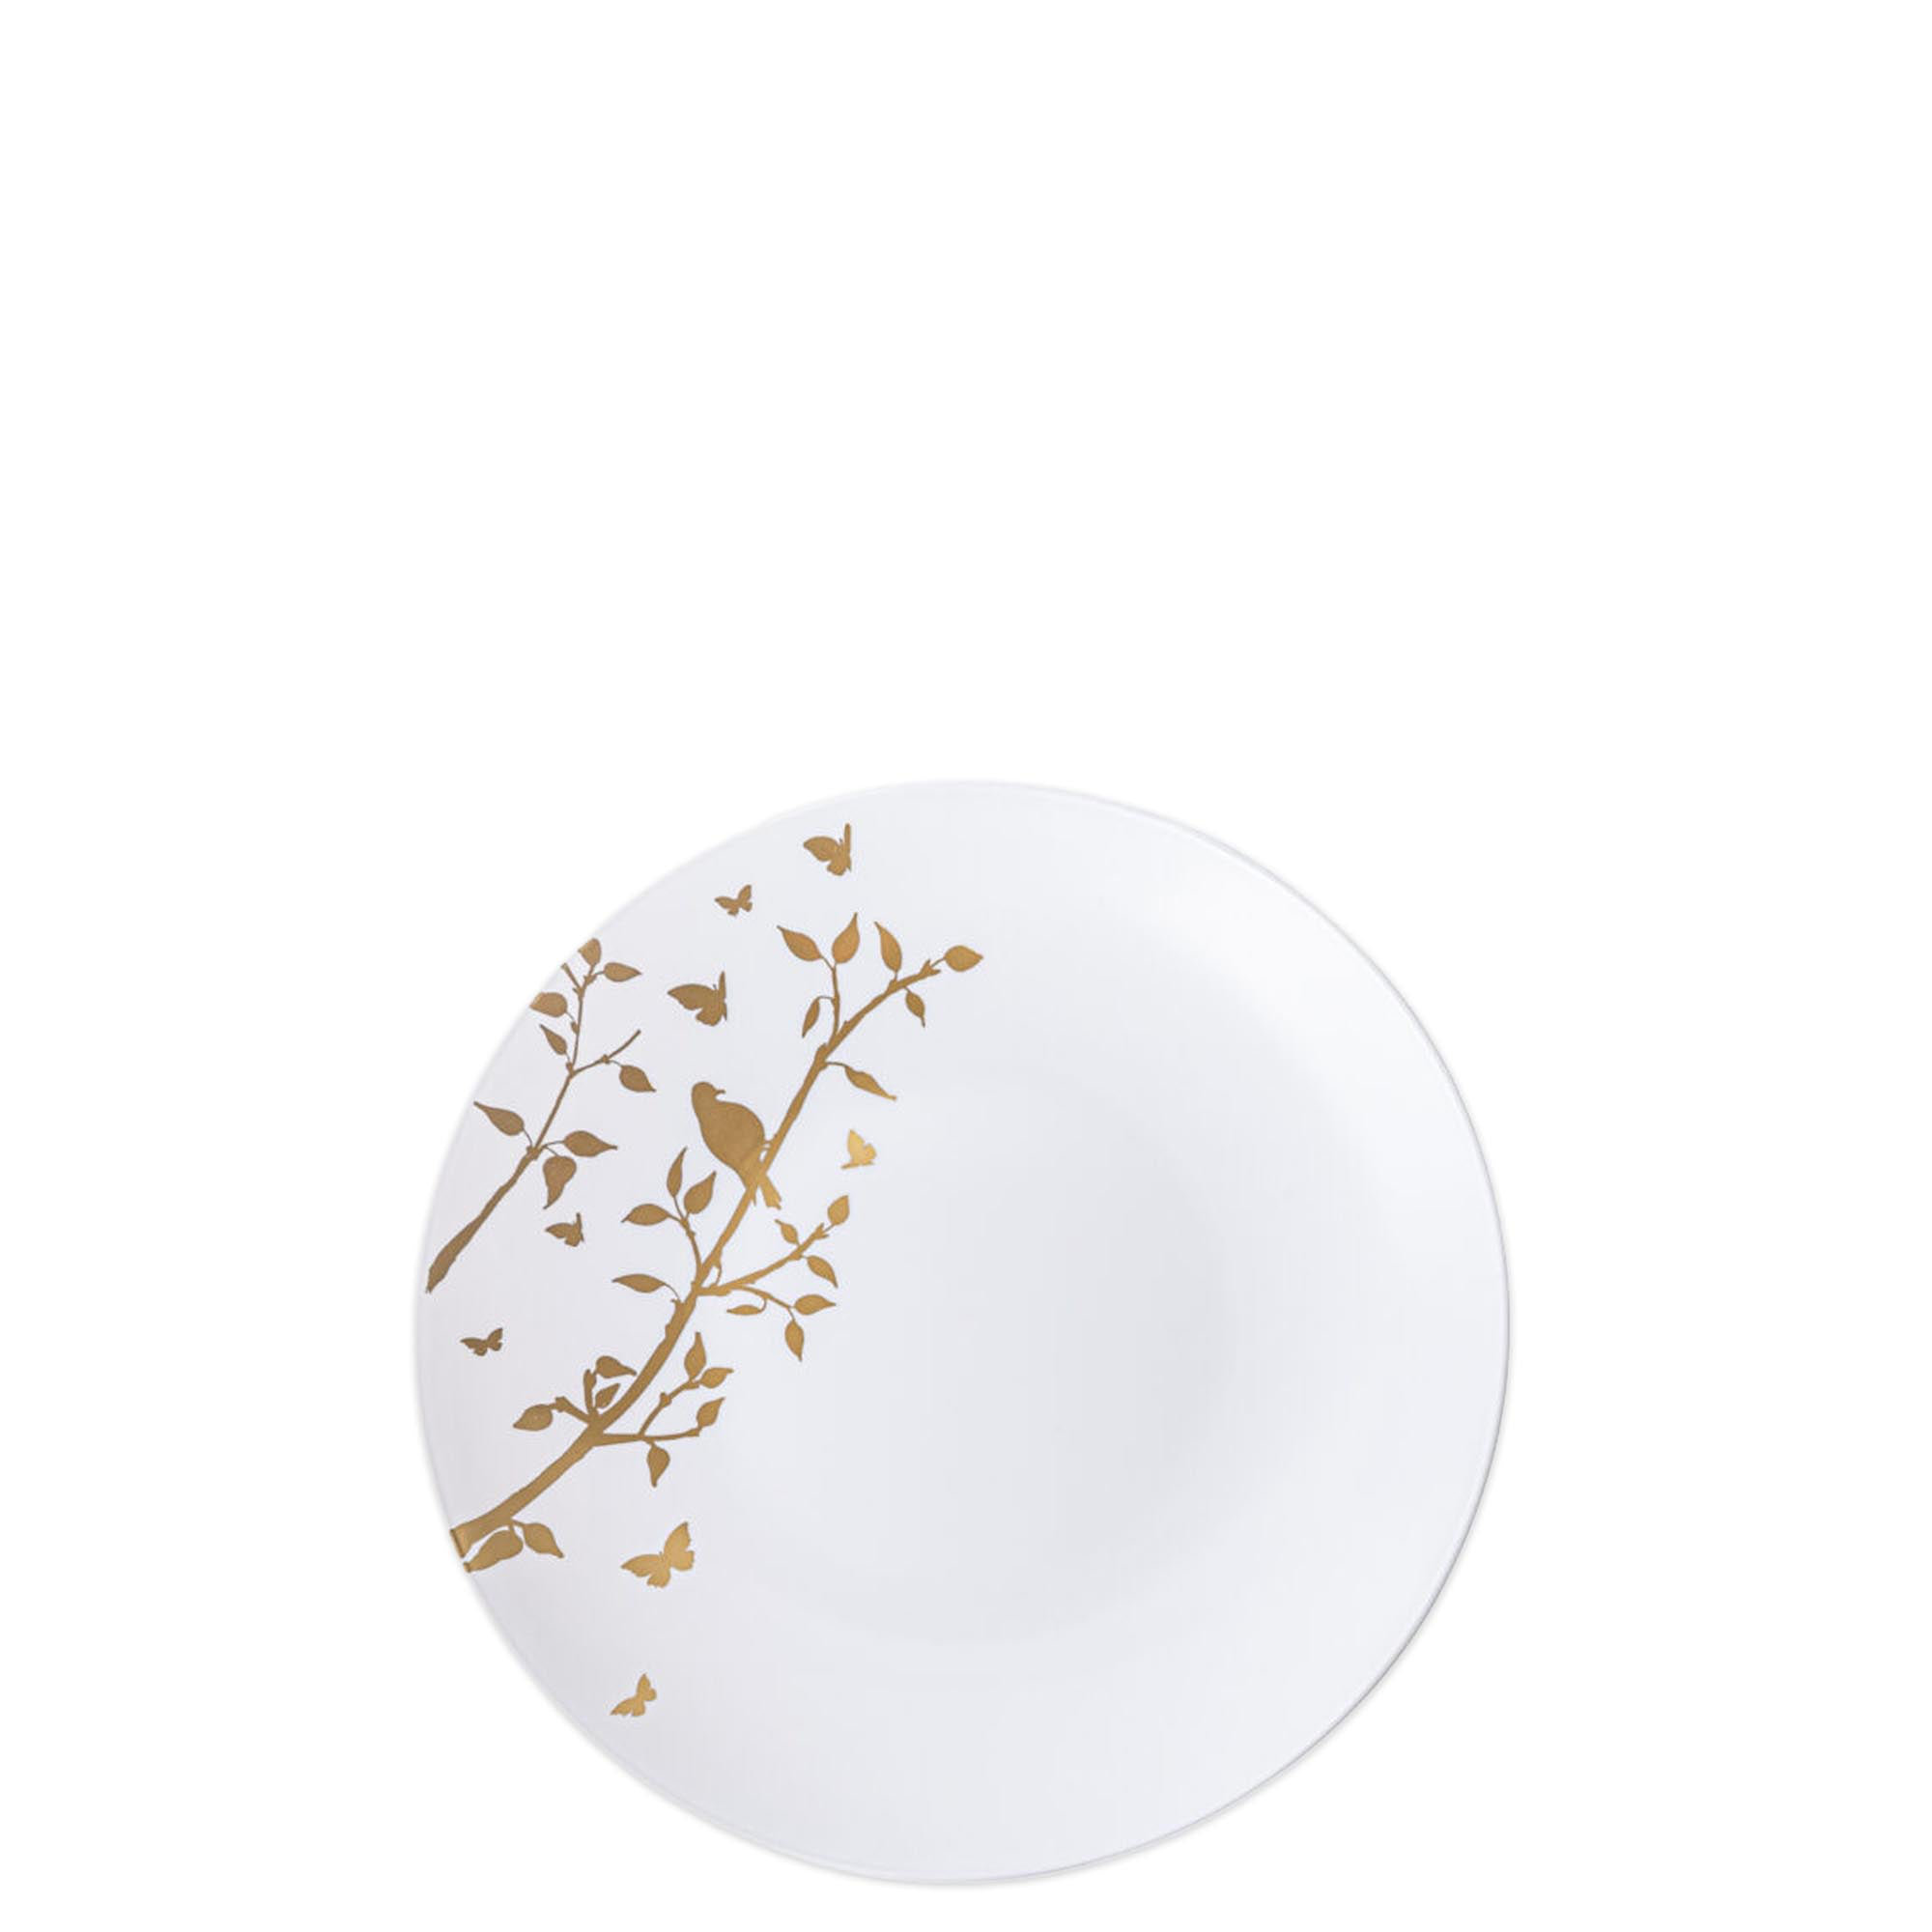 EcoQuality 6 inch Disposable Round White Plastic Plates with Floral Design  100 Guests